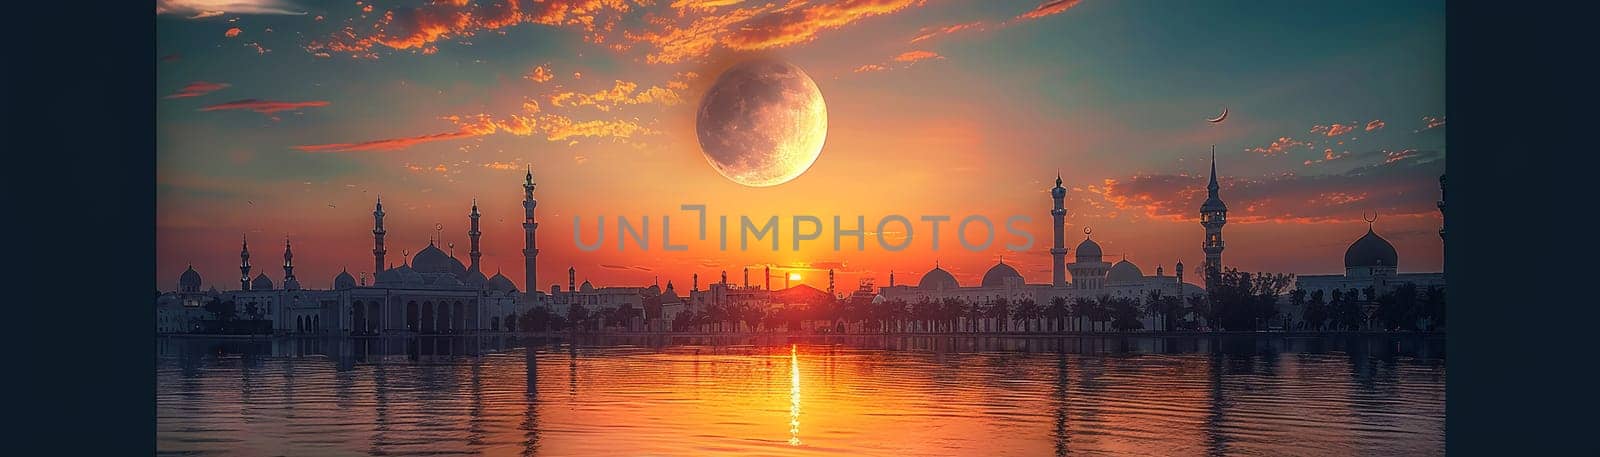 Islamic Crescent Moon Rising Over a Quiet Mosque The celestial symbol blends into the twilight by Benzoix